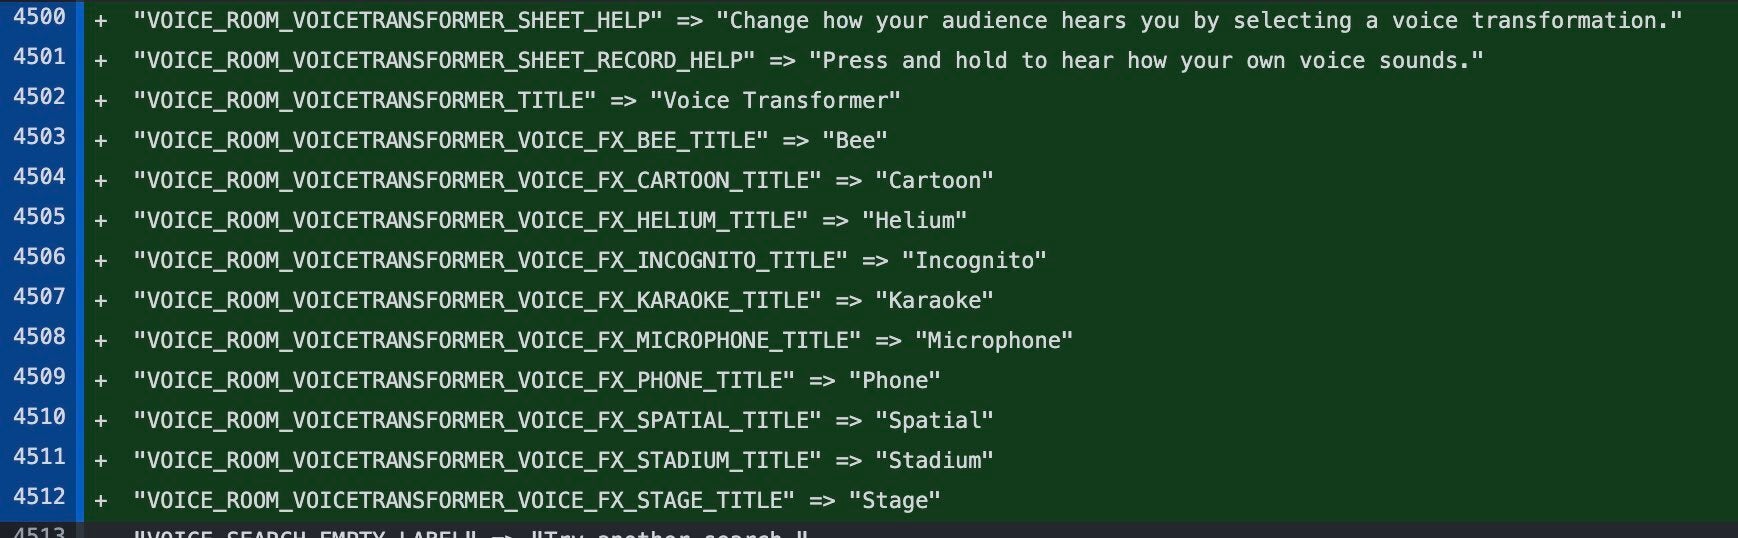 Back-end code references for the voice effects, revealed by Steve Moser - Twitter working on voice effects to change the way you sound for voice chat feature Twitter Spaces